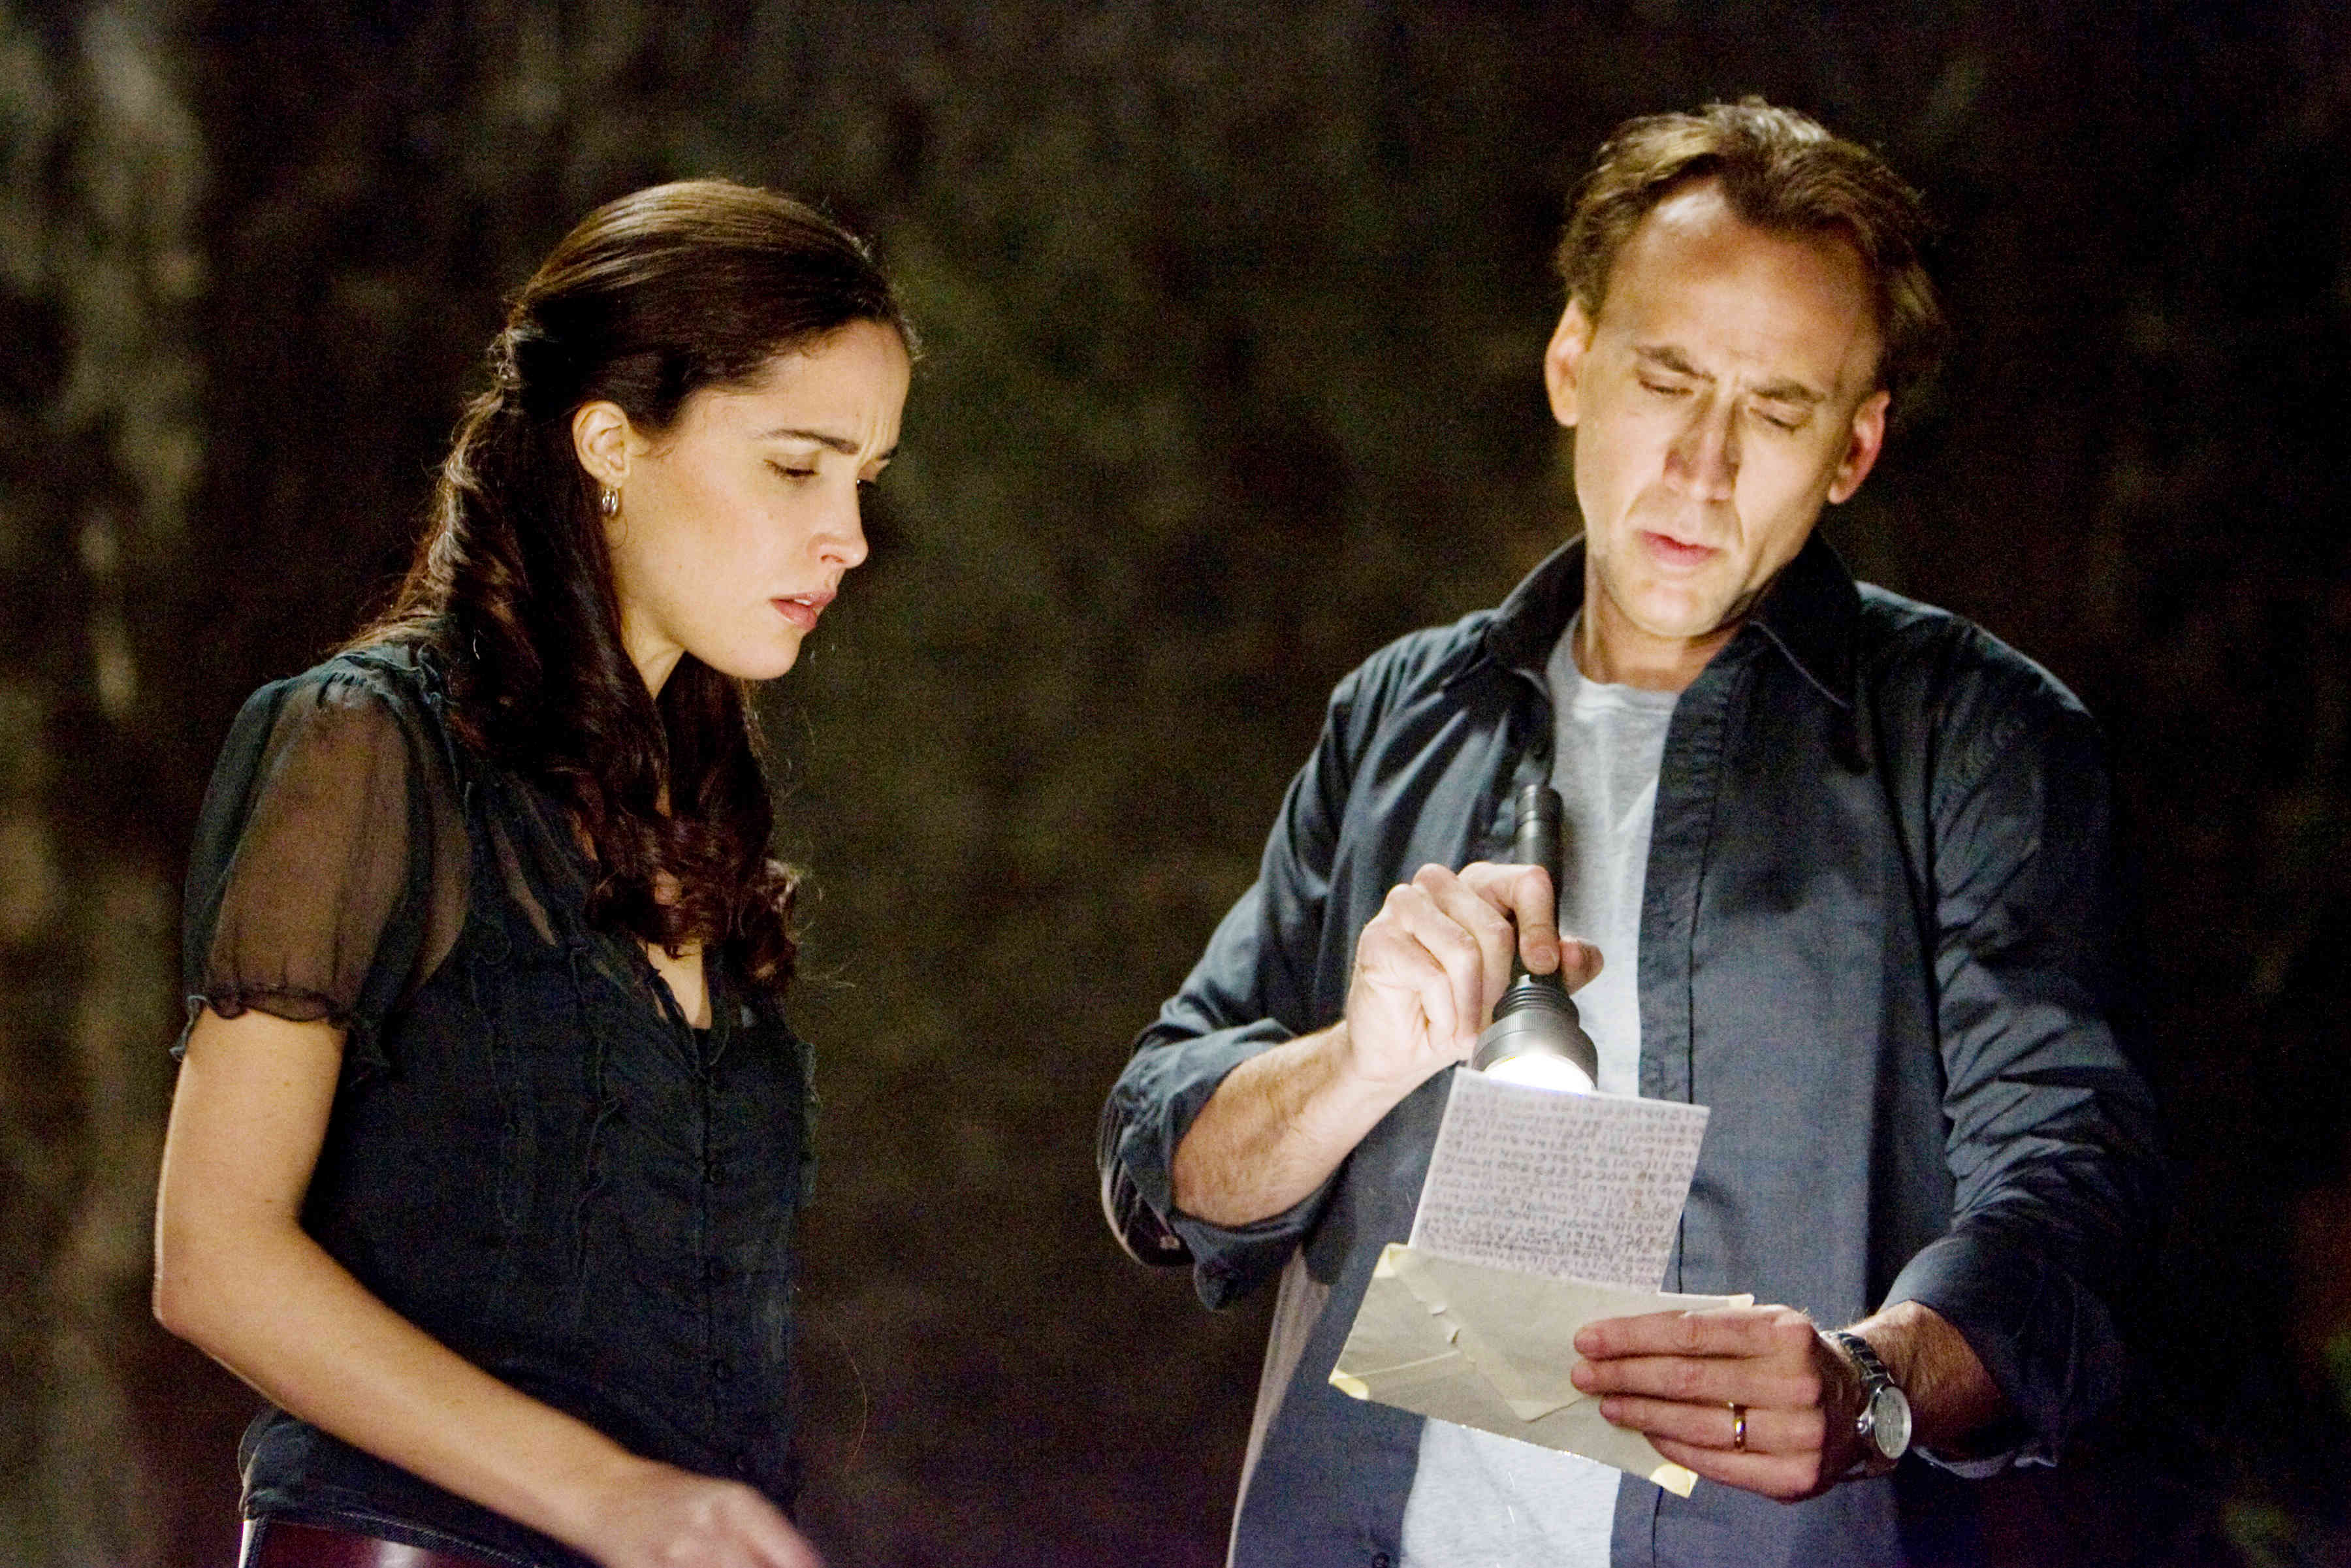 Rose Byrne stars as Diana Whelan and Nicolas Cage stars as Ted Myles in Summit Entertainment's Knowing (2009)